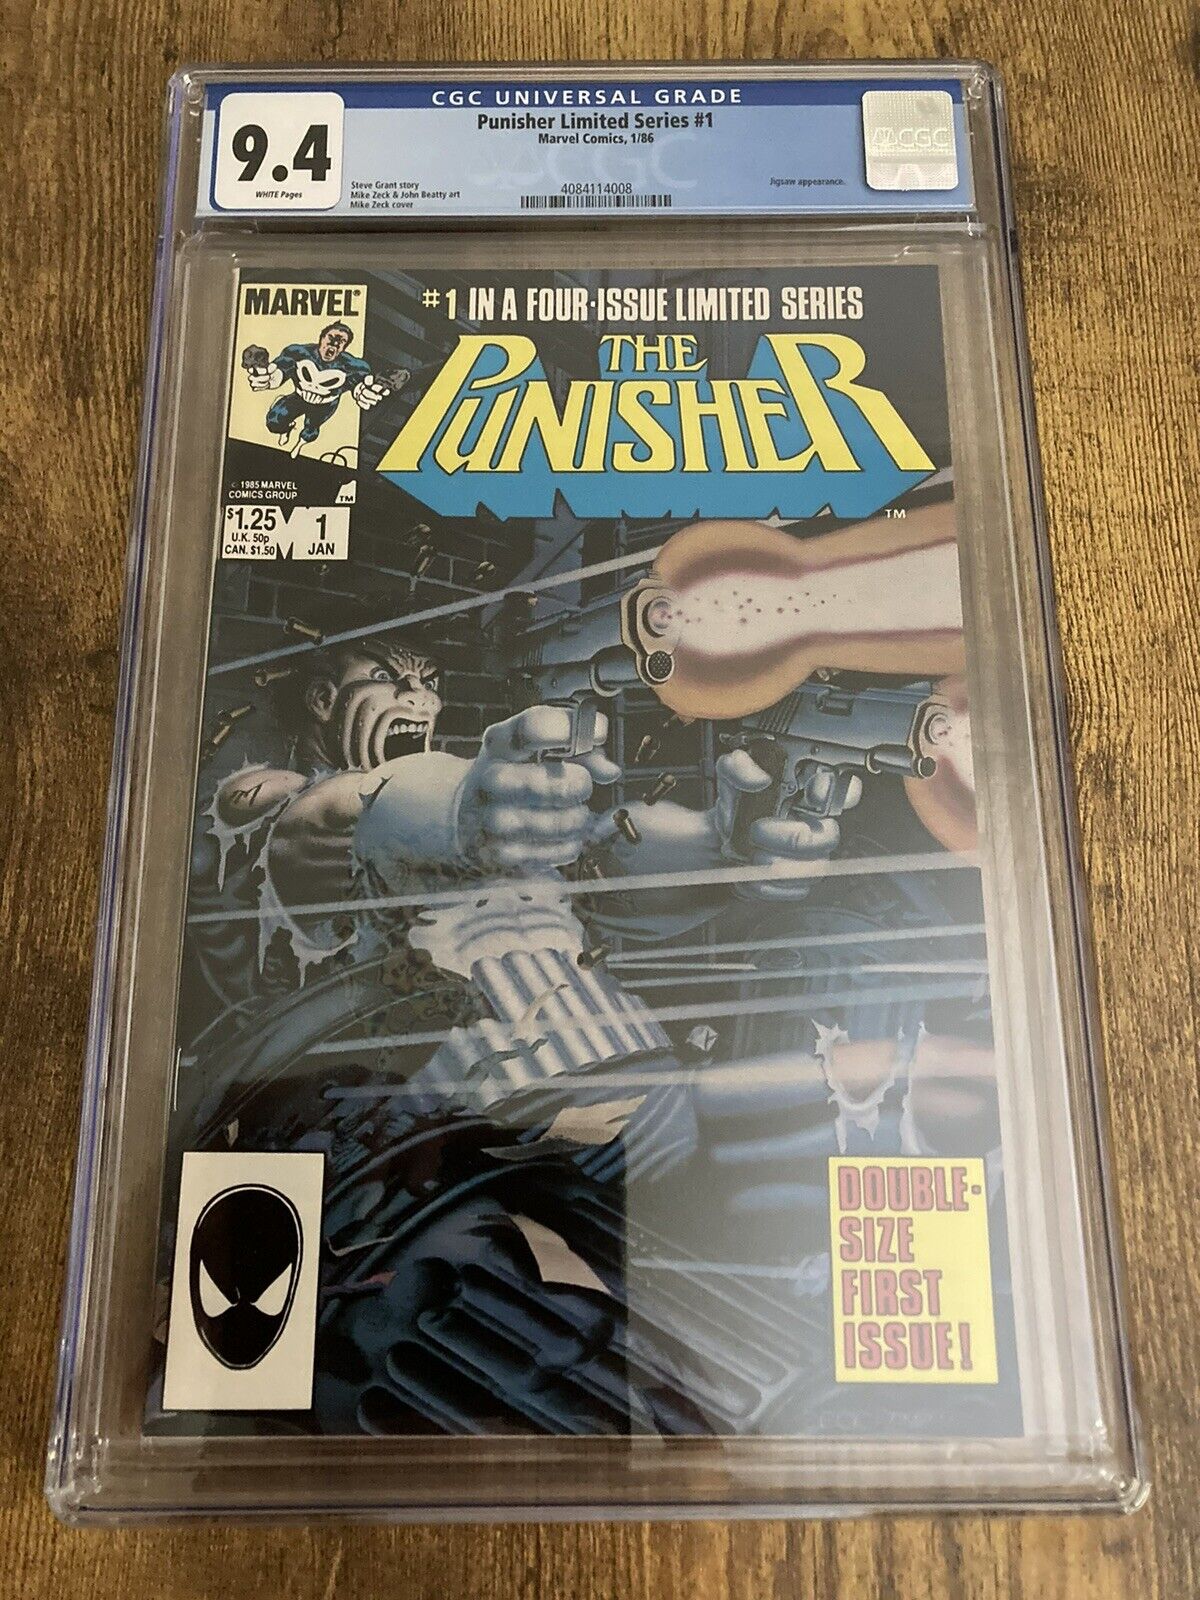 Punisher Limited Series 1-5 CGC ALL NEAR MINT (CGC 9.4/9.6)